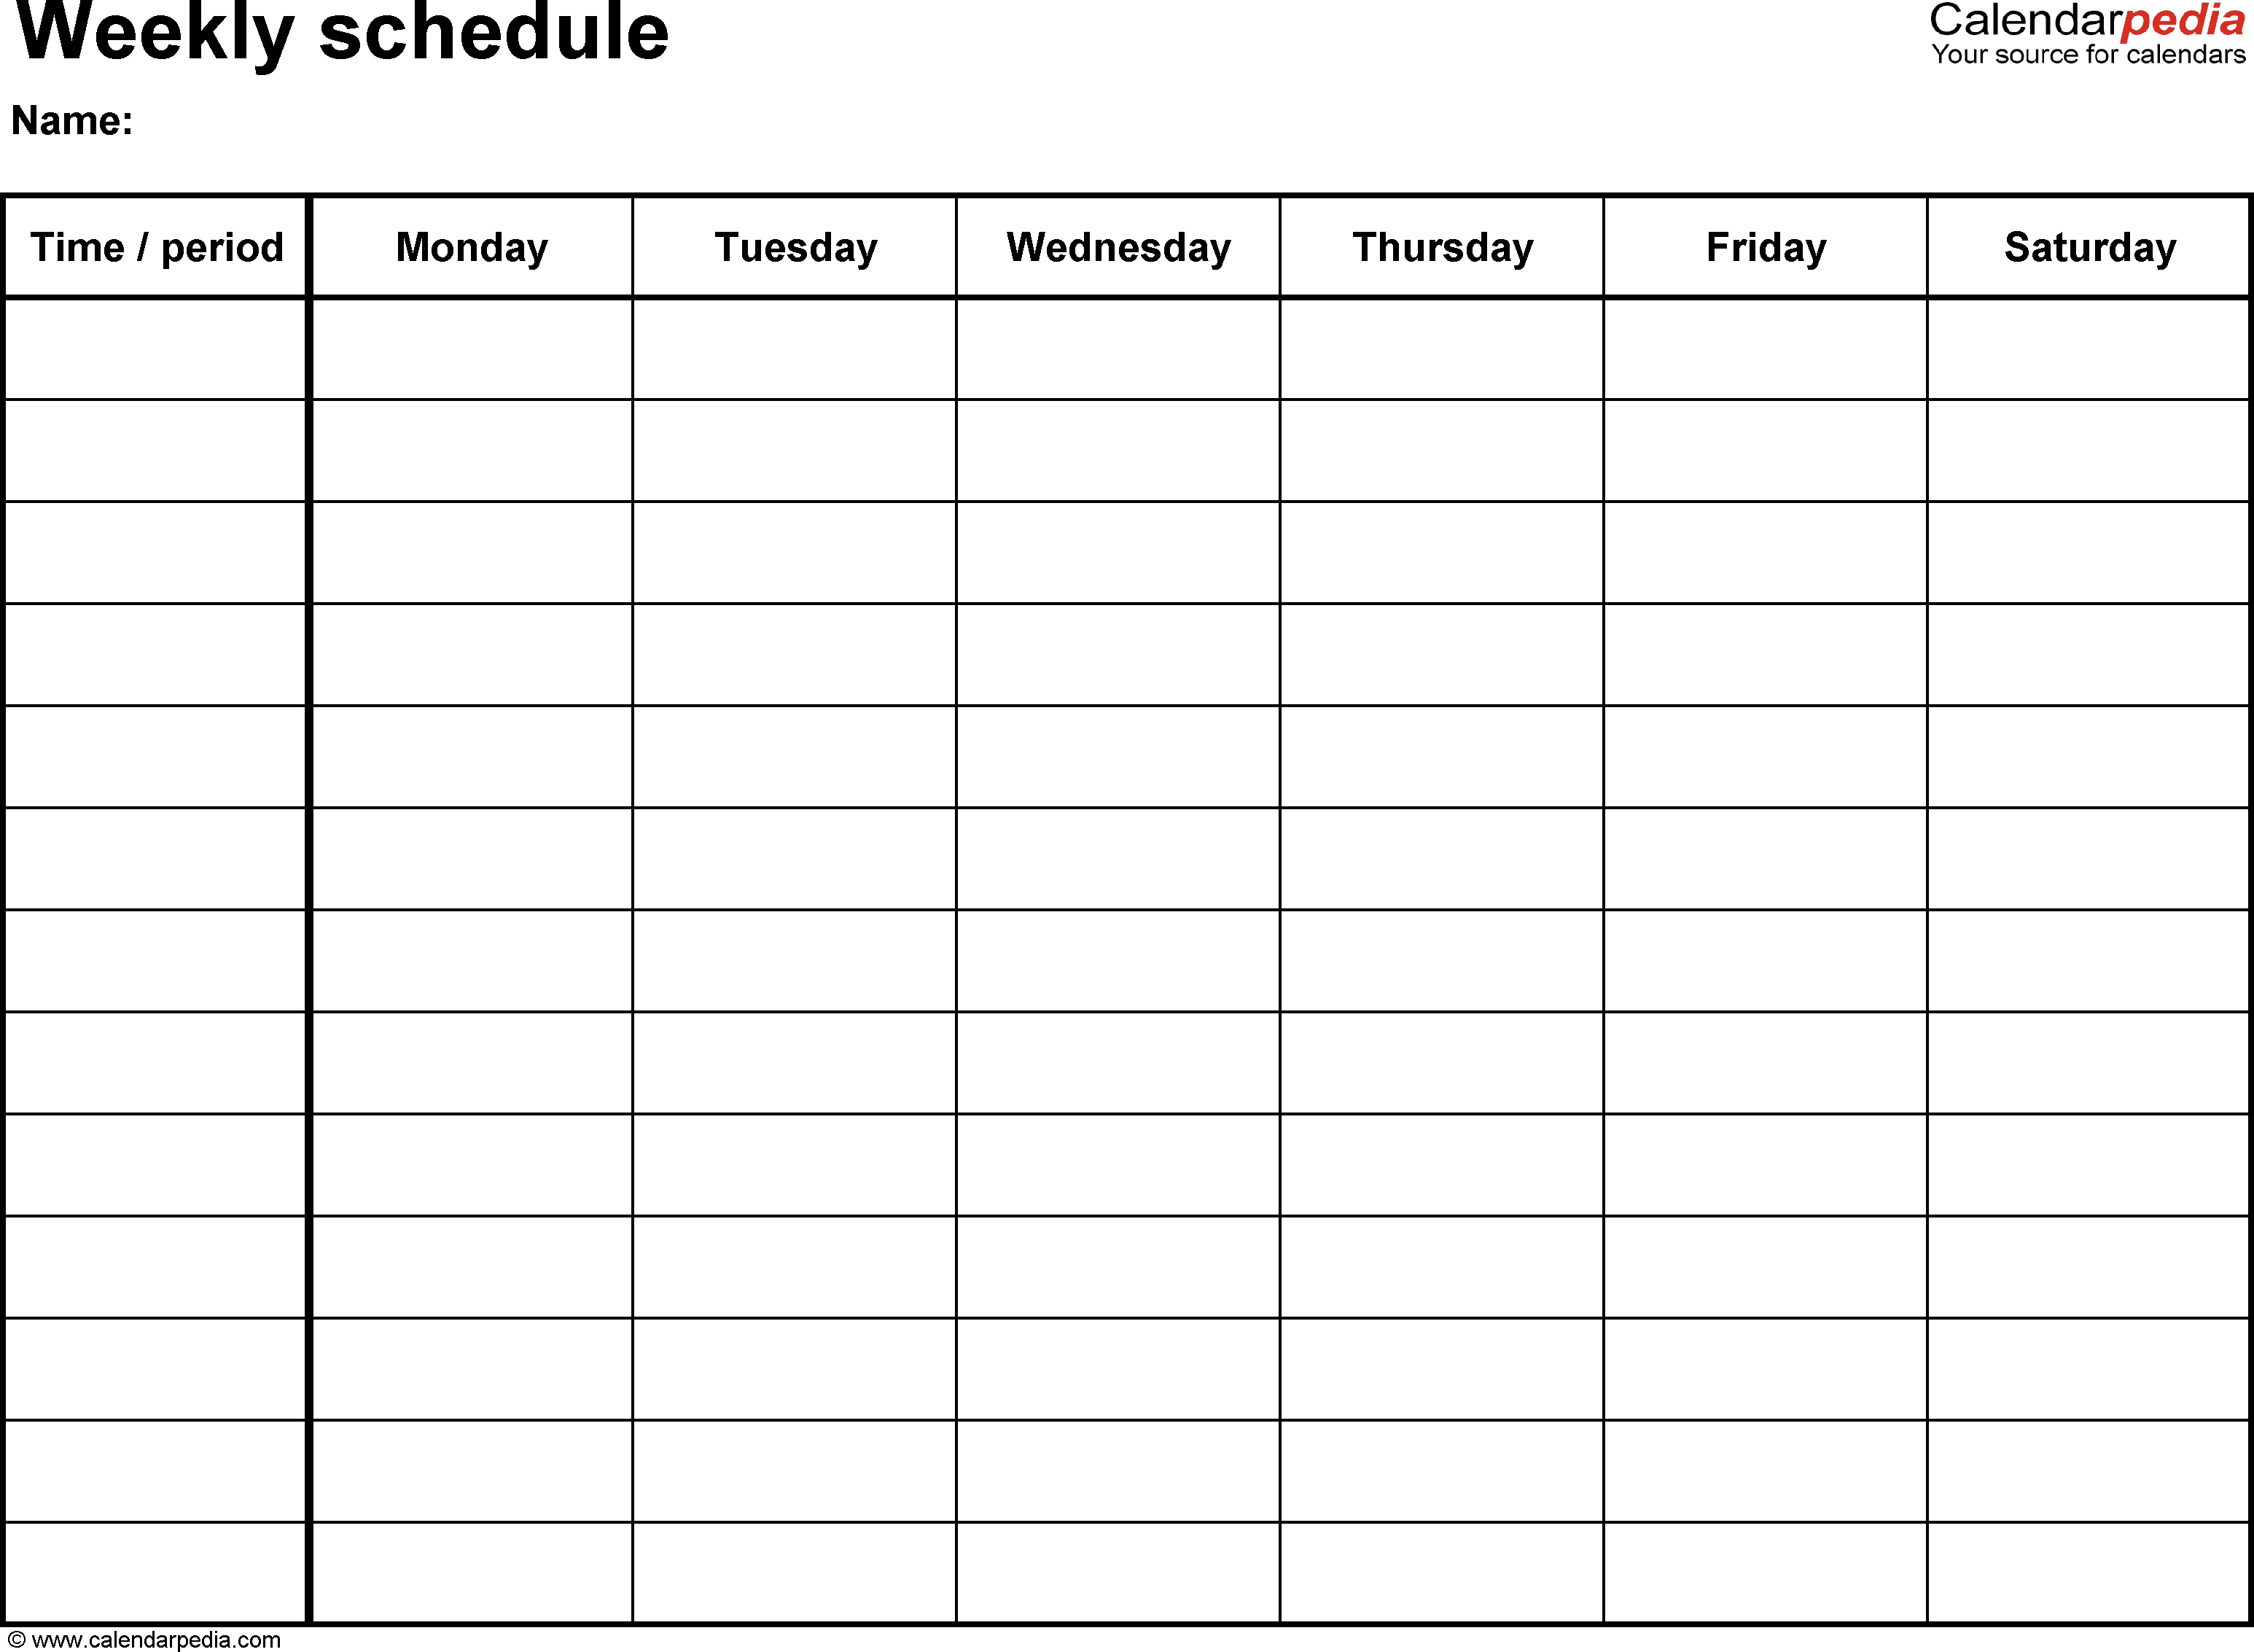 Free Weekly Schedule Templates For Excel - 18 Templates with regard to Blank Weekly Schedule With Times